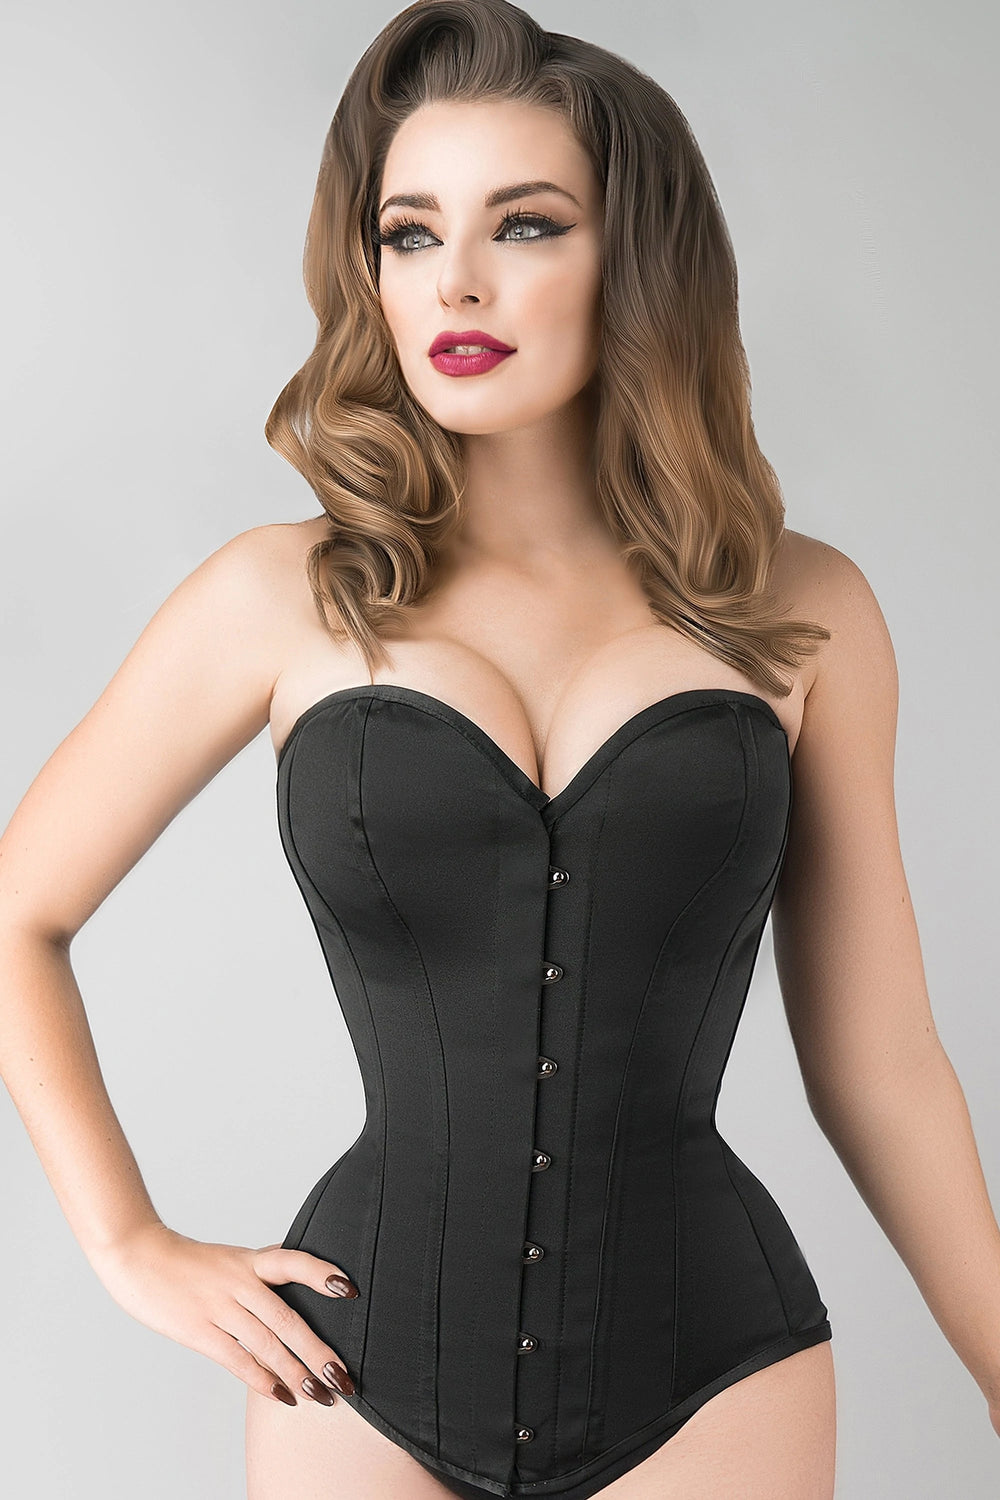 How can Corsets Accelerate Loss of Belly Fat? – Bunny Corset